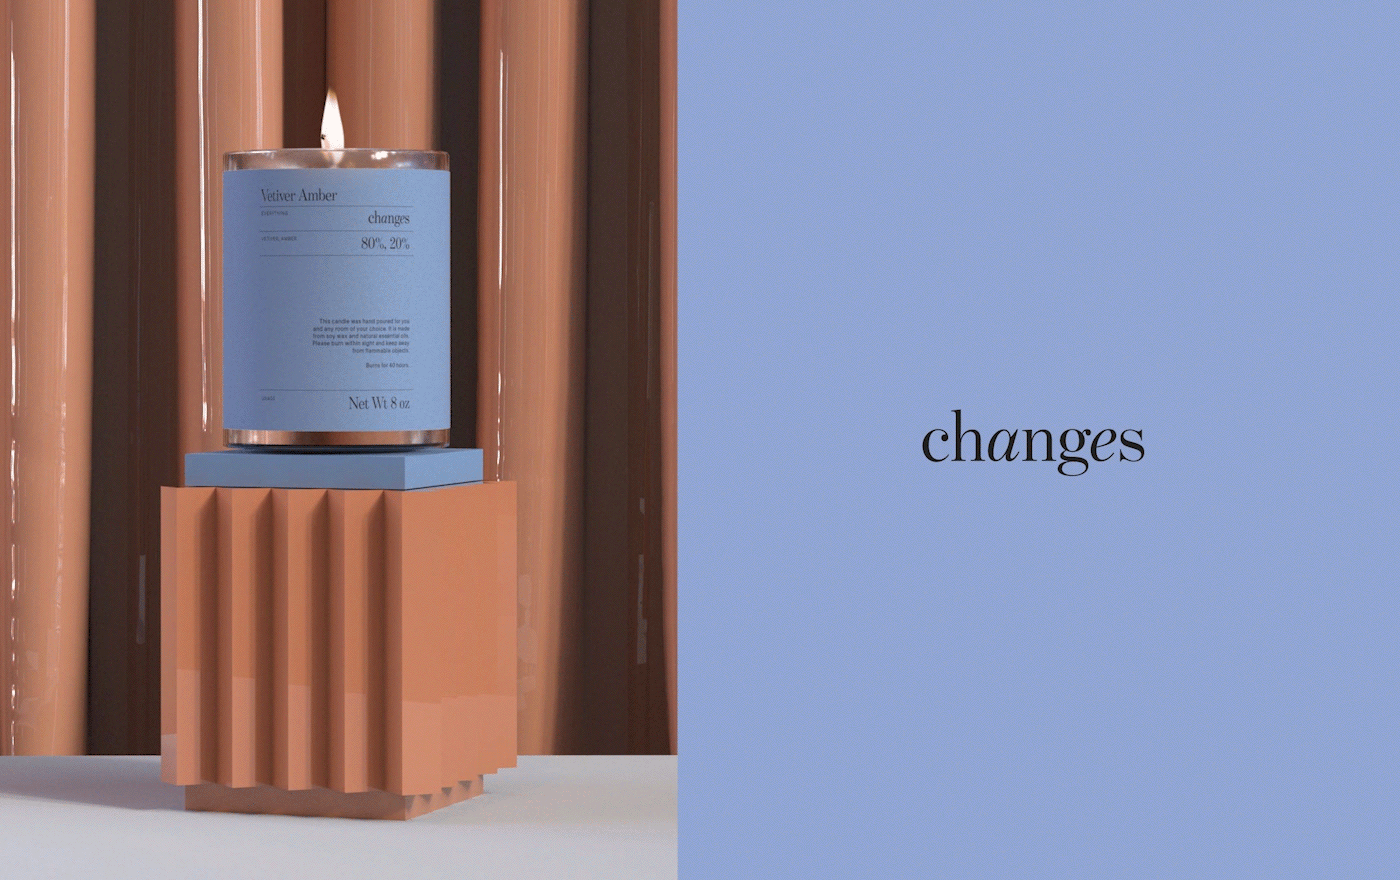 Changes - Candle with Color Changing Label on Behance273c5a89422285.5df3d629afb37.gif